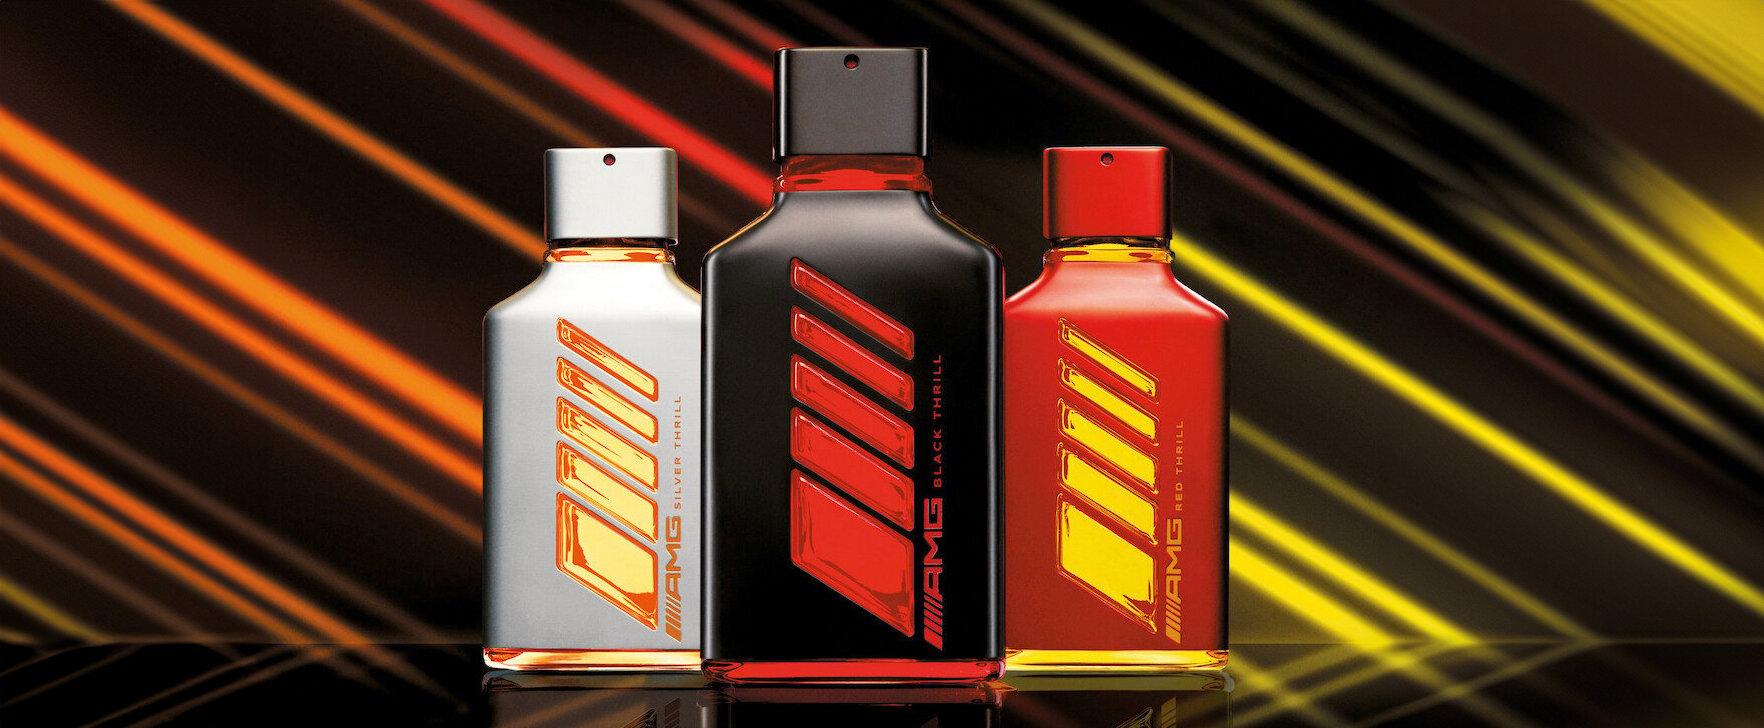 An Ode To High-Performance Vehicles: The New Thrill Fragrance Trilogy From AMG